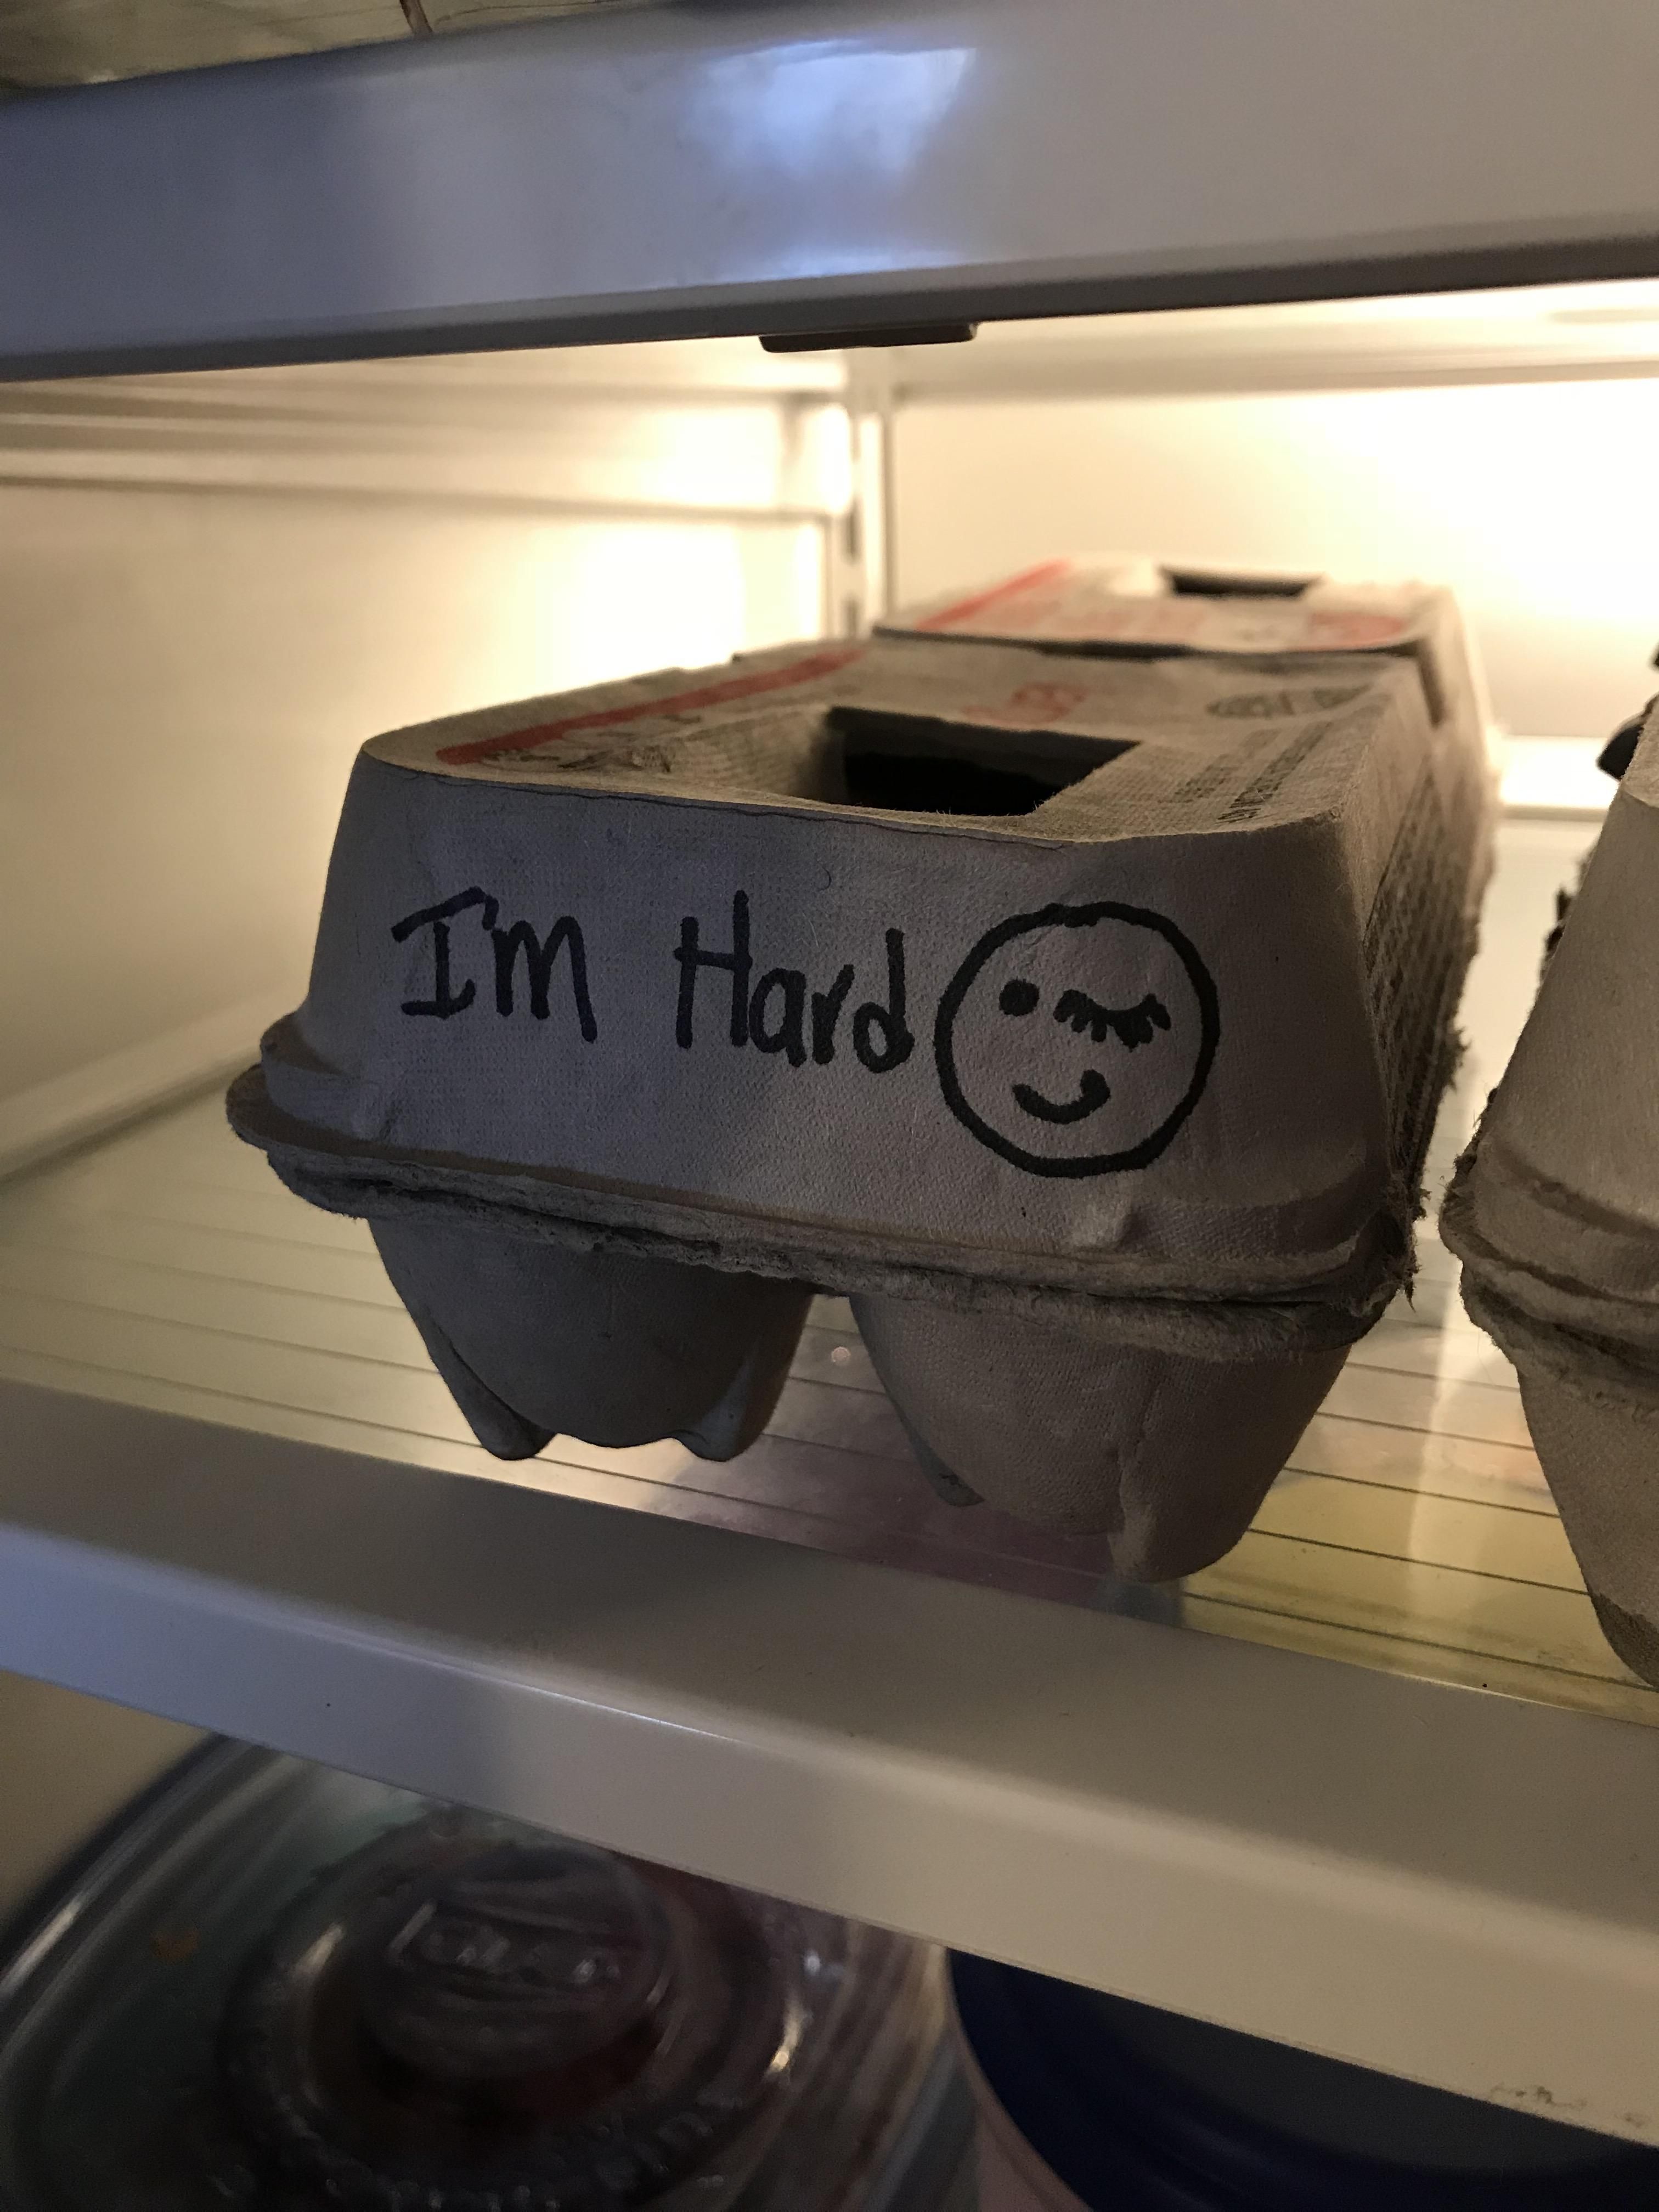 I knew my wife made some hard boiled eggs yesterday, opened the fridge this morning to this..